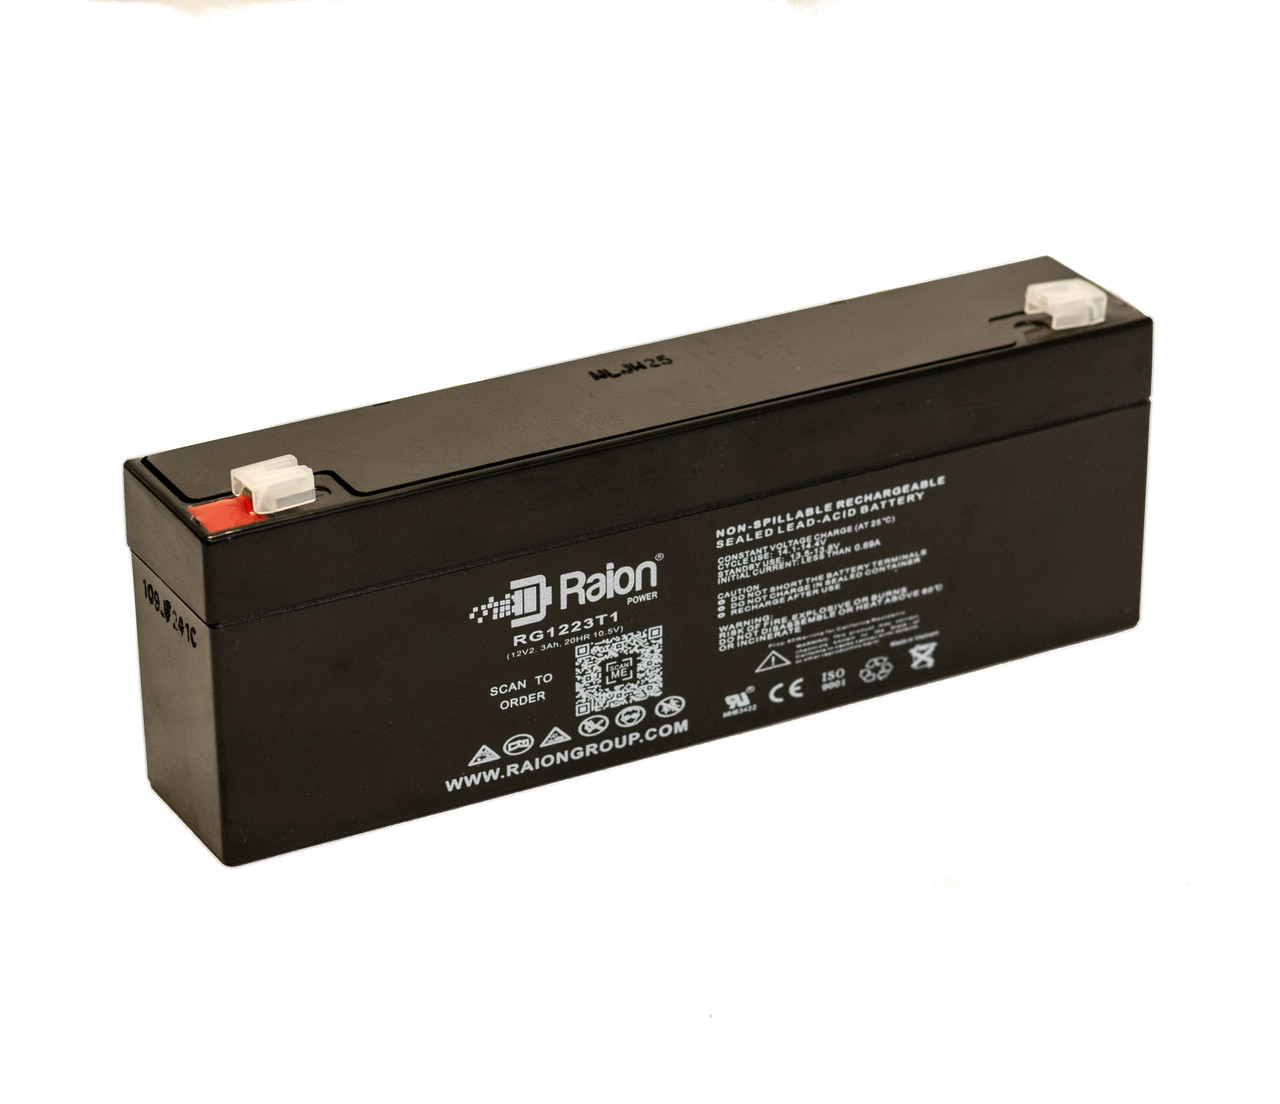 Raion Power RG1223T1 Replacement Battery for Kaiying KS2.3-12